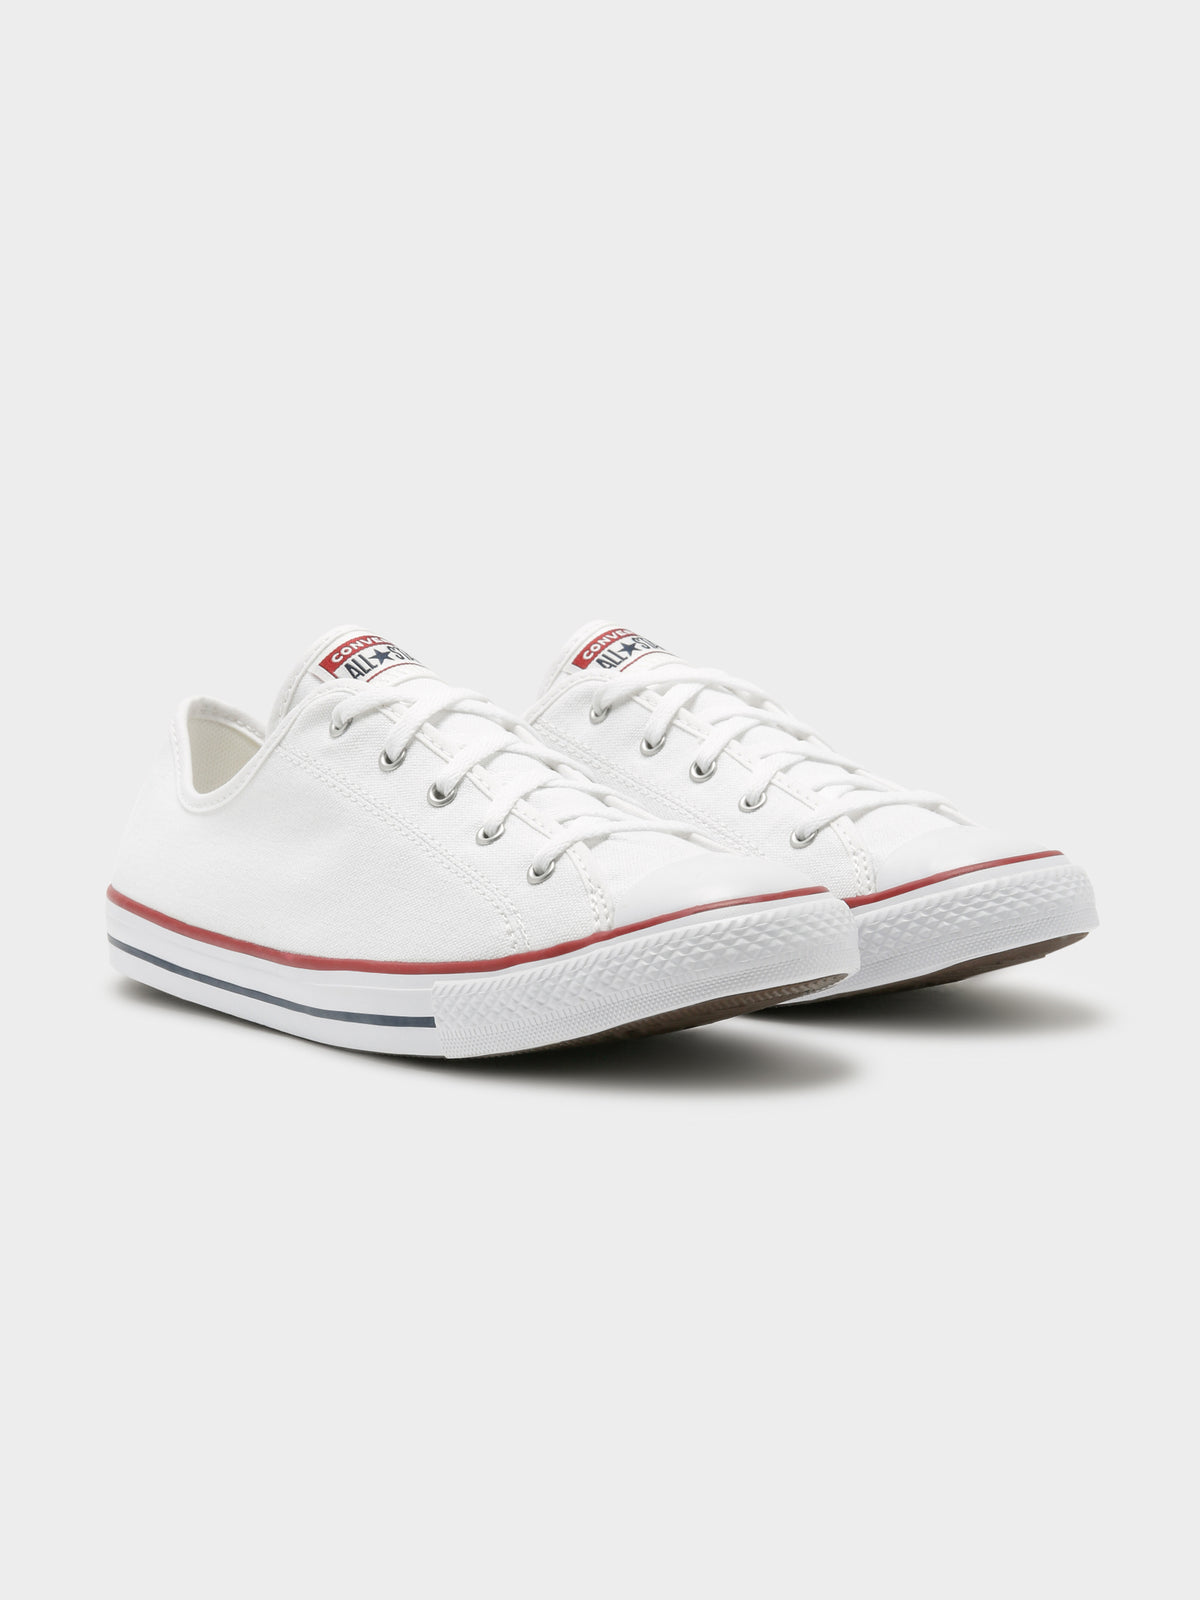 Womens Dainty Canvas Sneakers in White